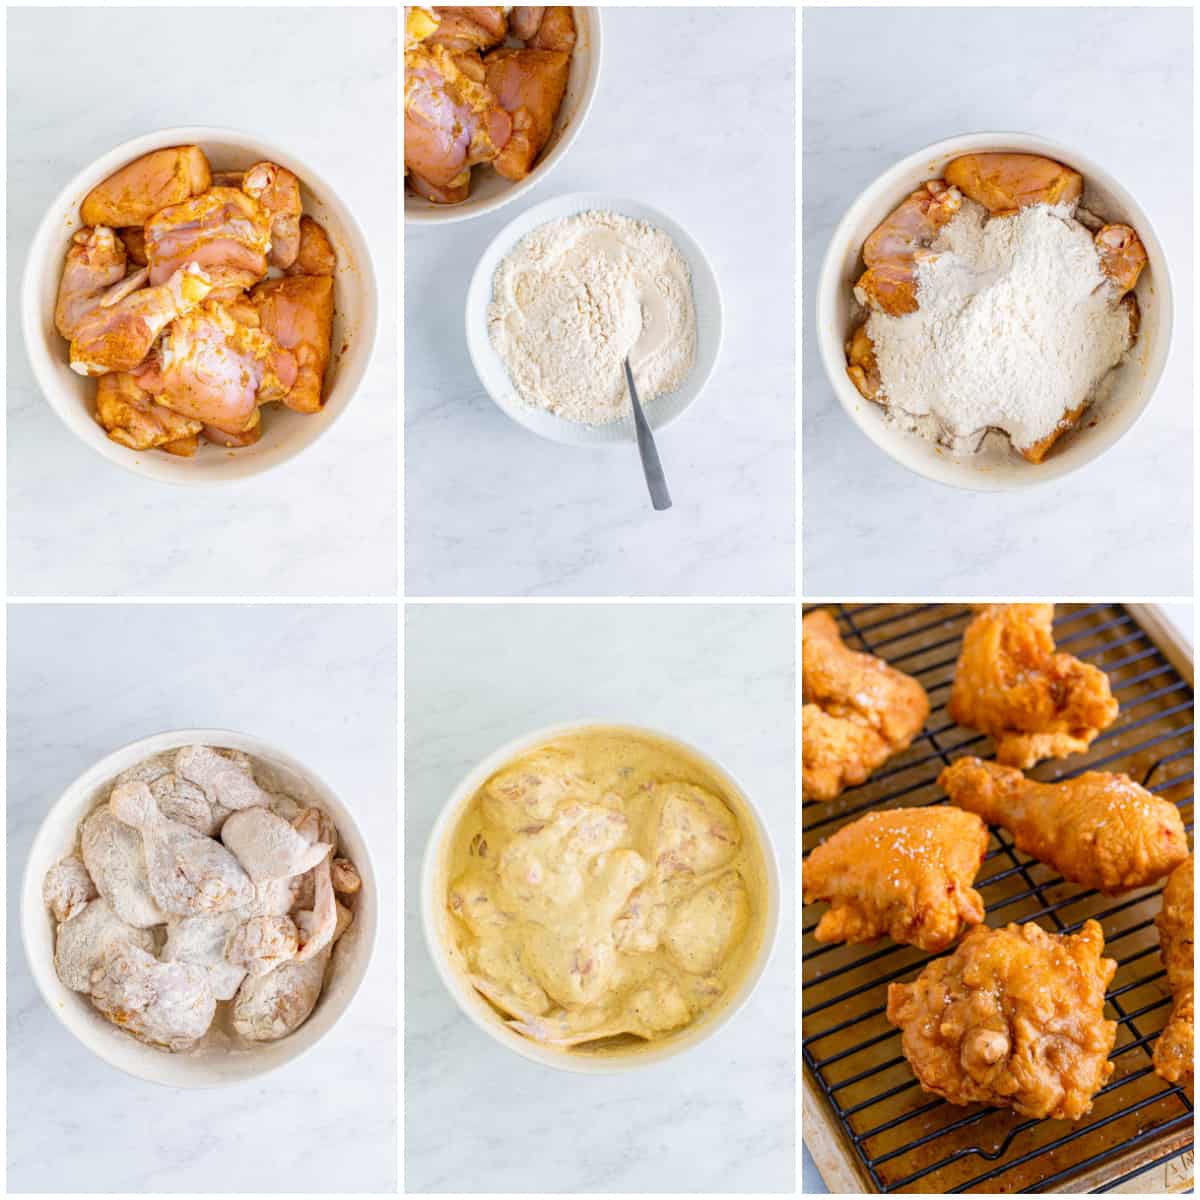 Step by step photos on how to make Grandma's Fried Chicken Recipe.